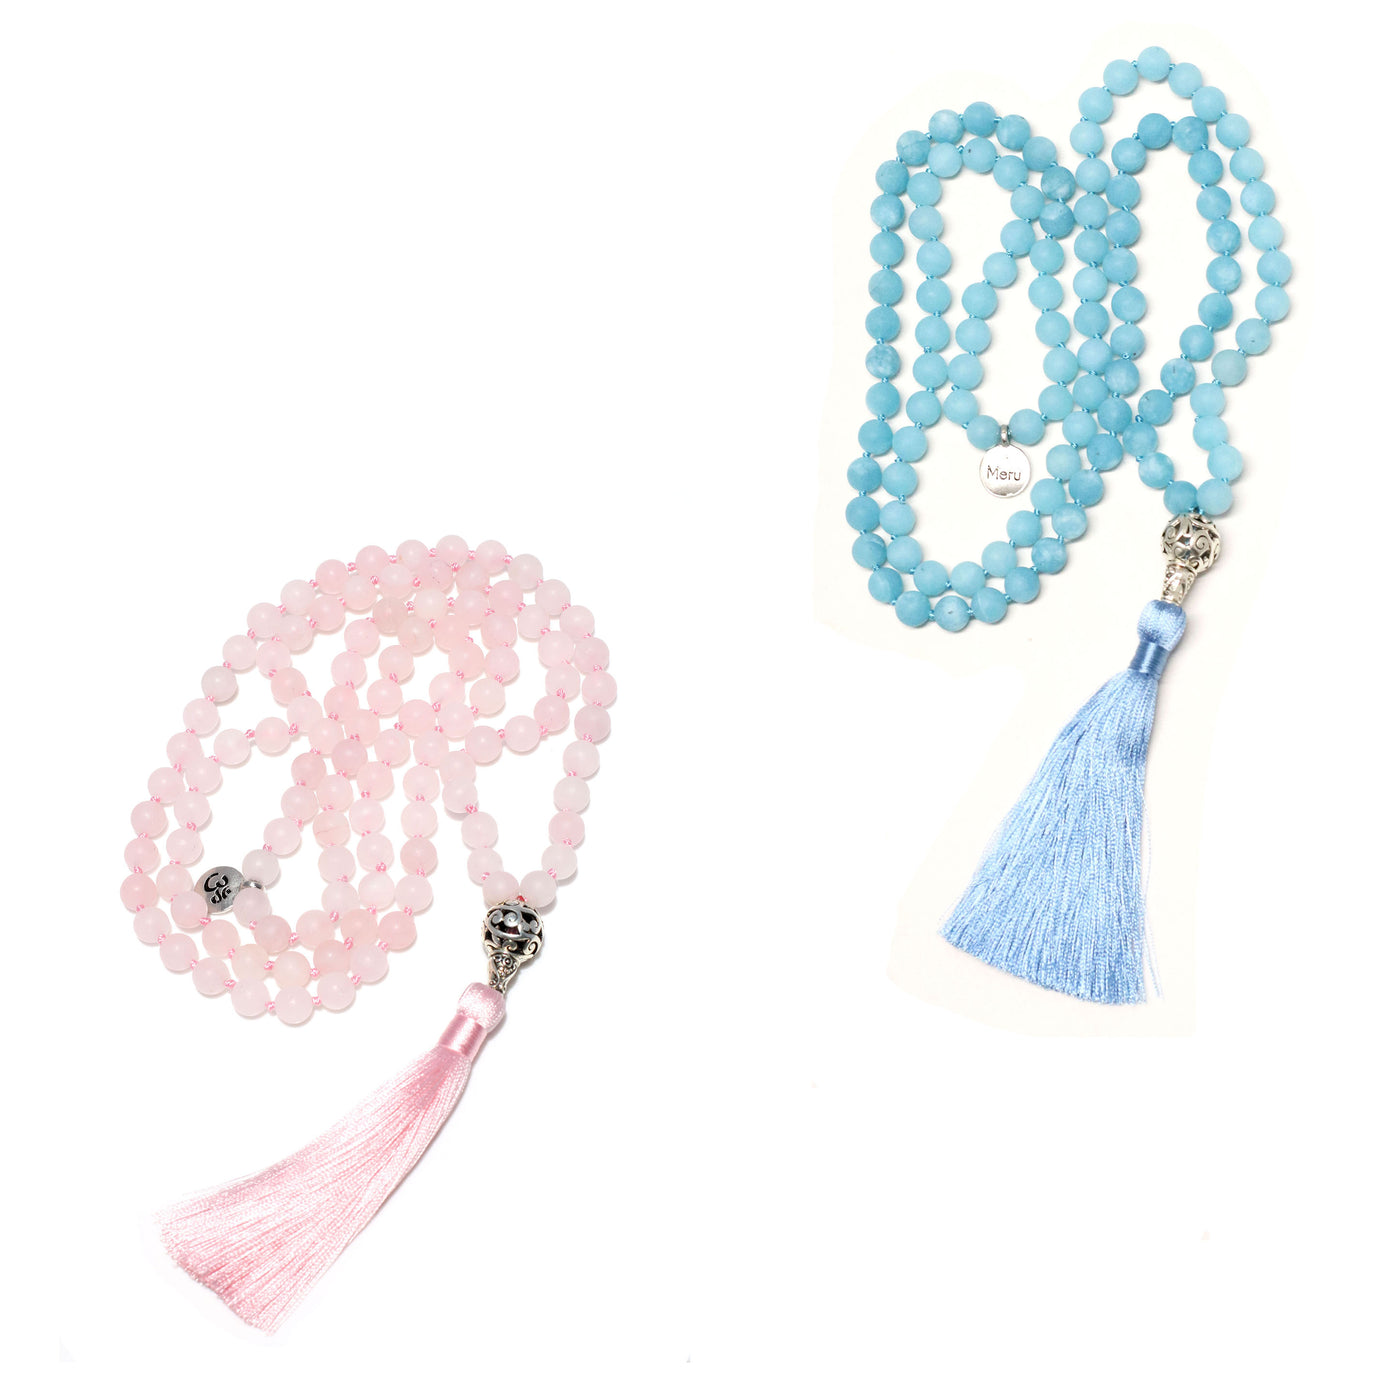 How to Choose a Mala (8 Different Ways!)